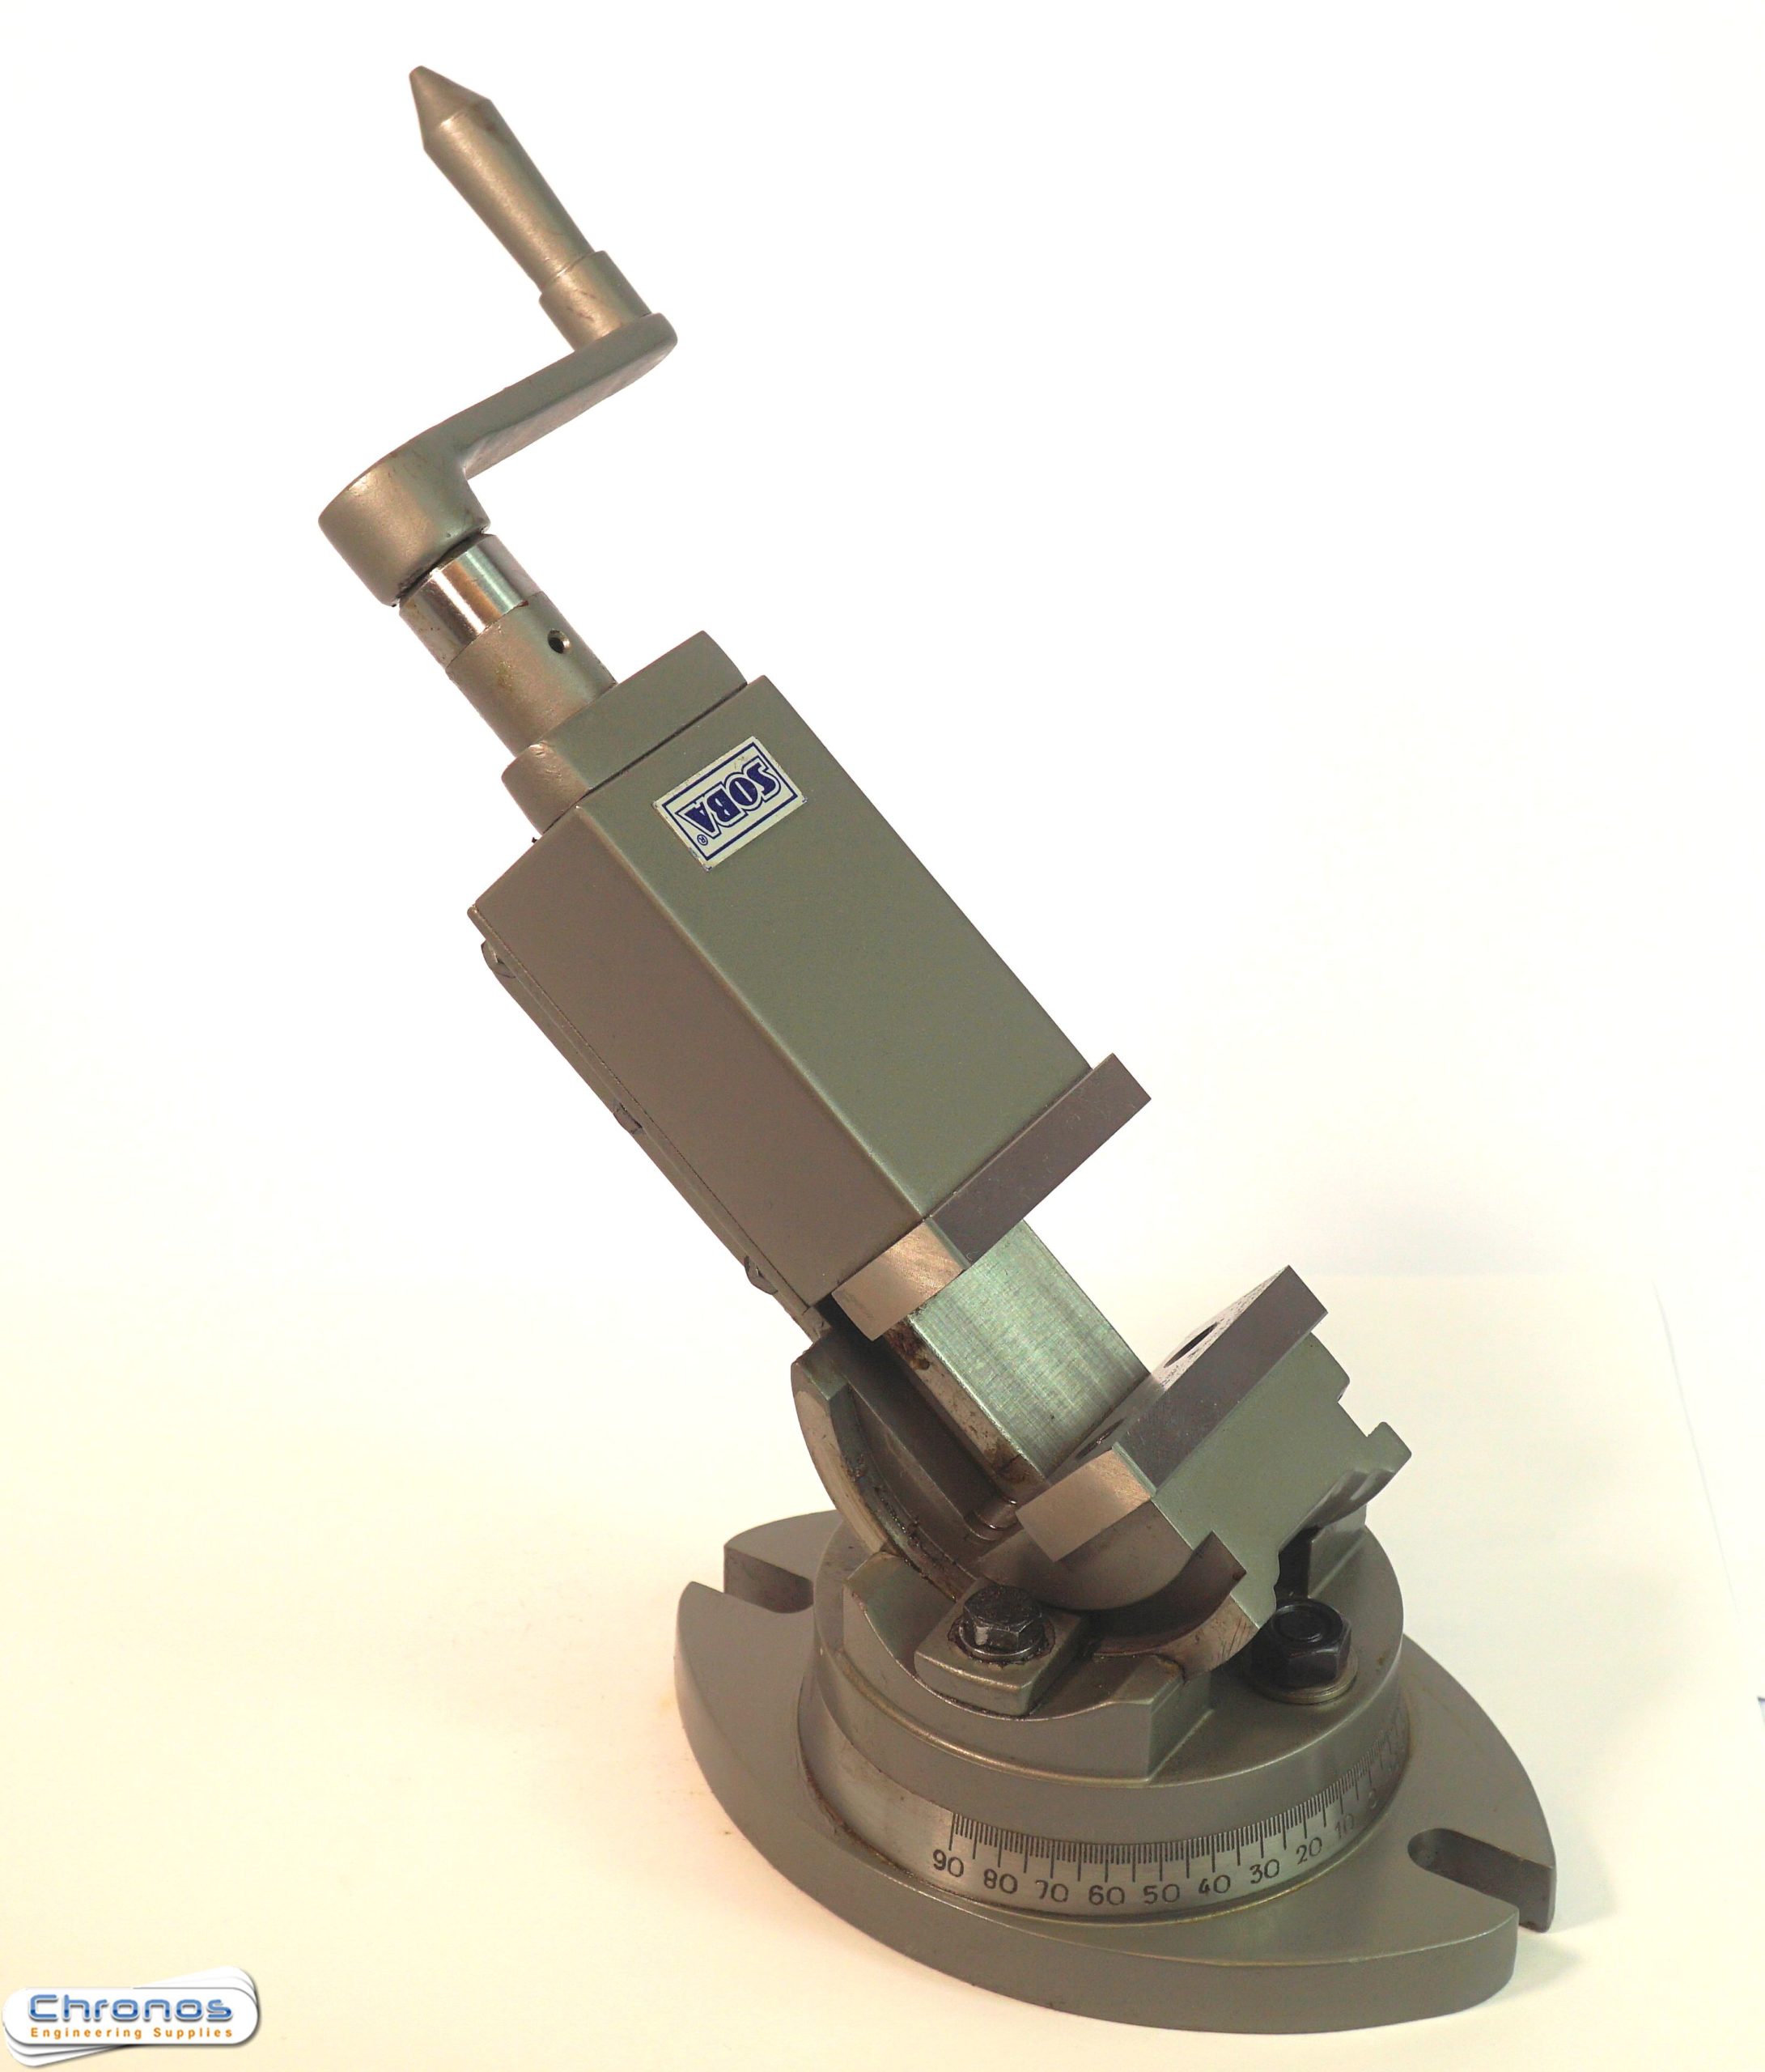 2" 50 mm 2" Super Precision Swivel Milling Machine Vice From Chronos 